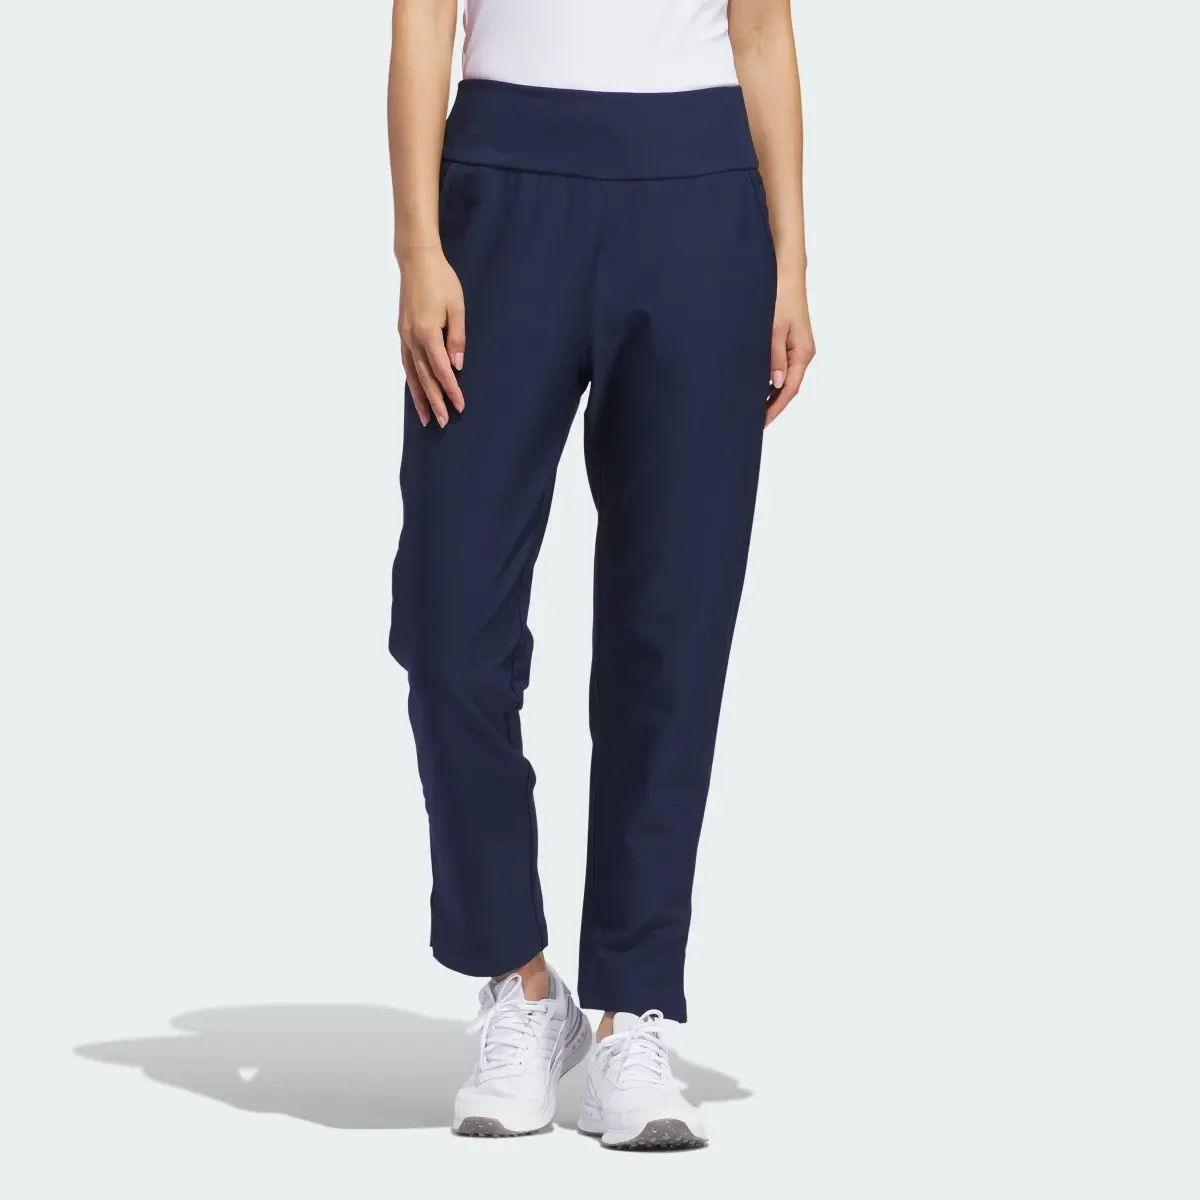 Adidas Ultimate365 Solid Ankle Pants. 1